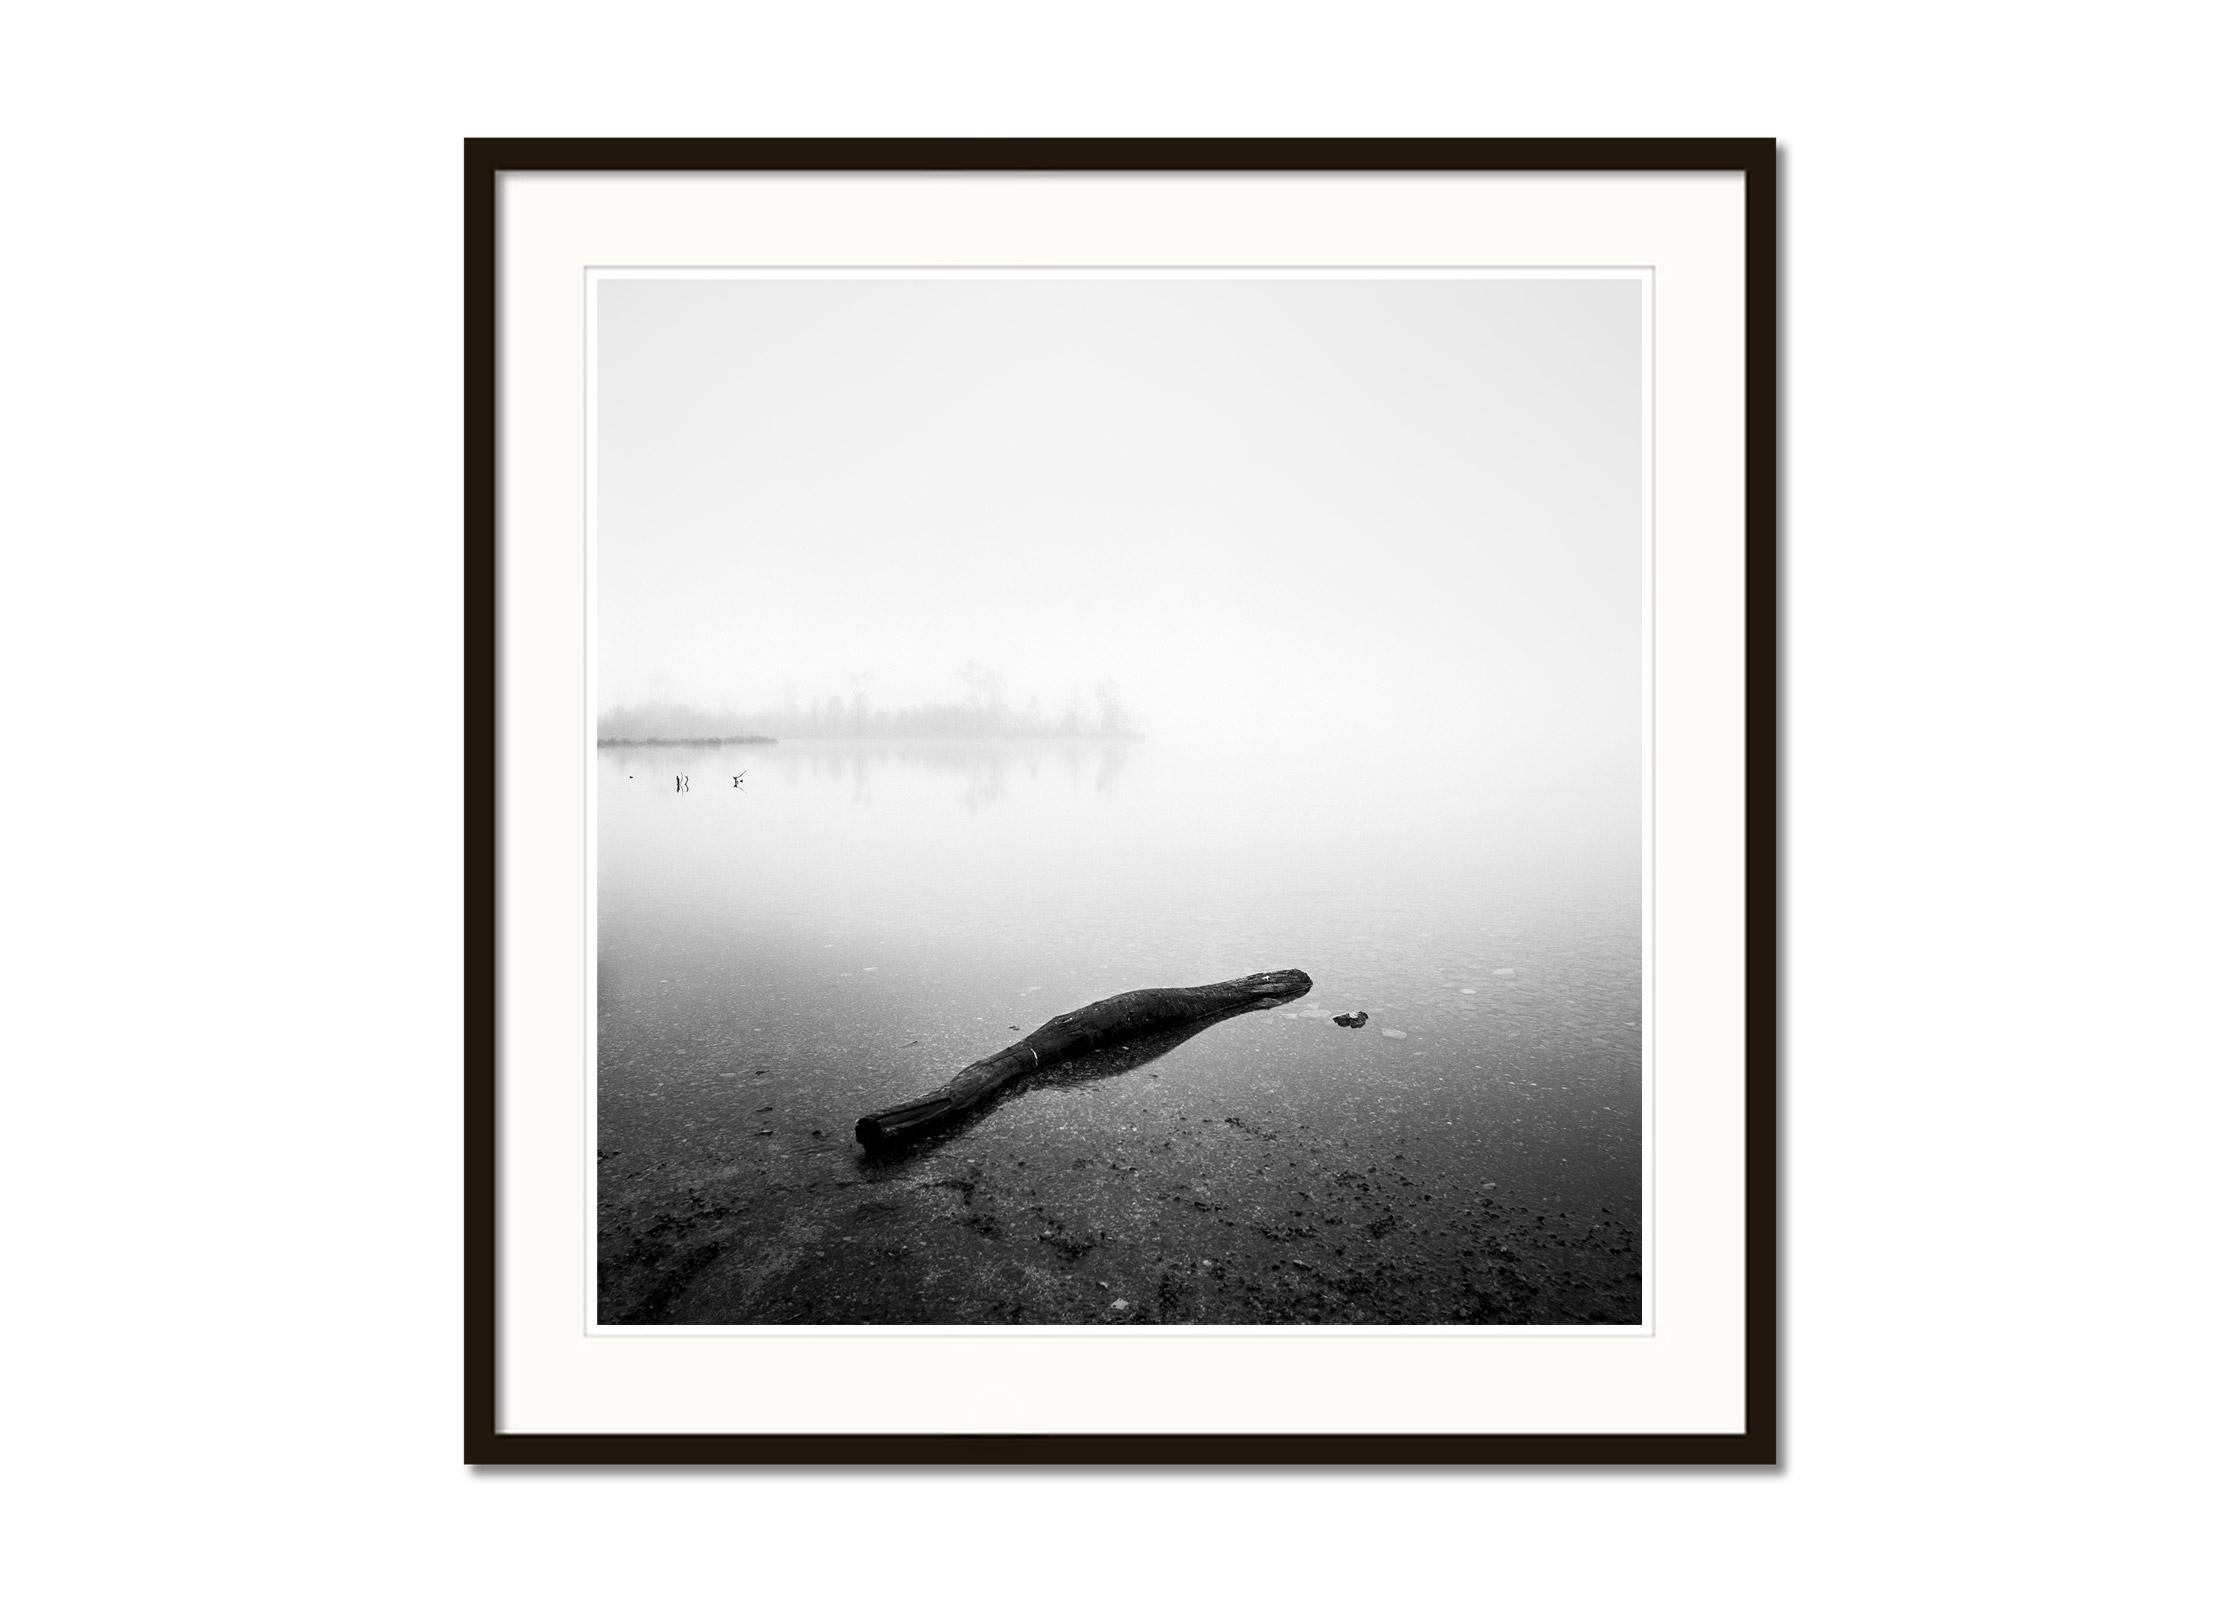 Drift Wood, Lake, Austria, black and white long exposure photography, landscape - Gray Landscape Photograph by Gerald Berghammer